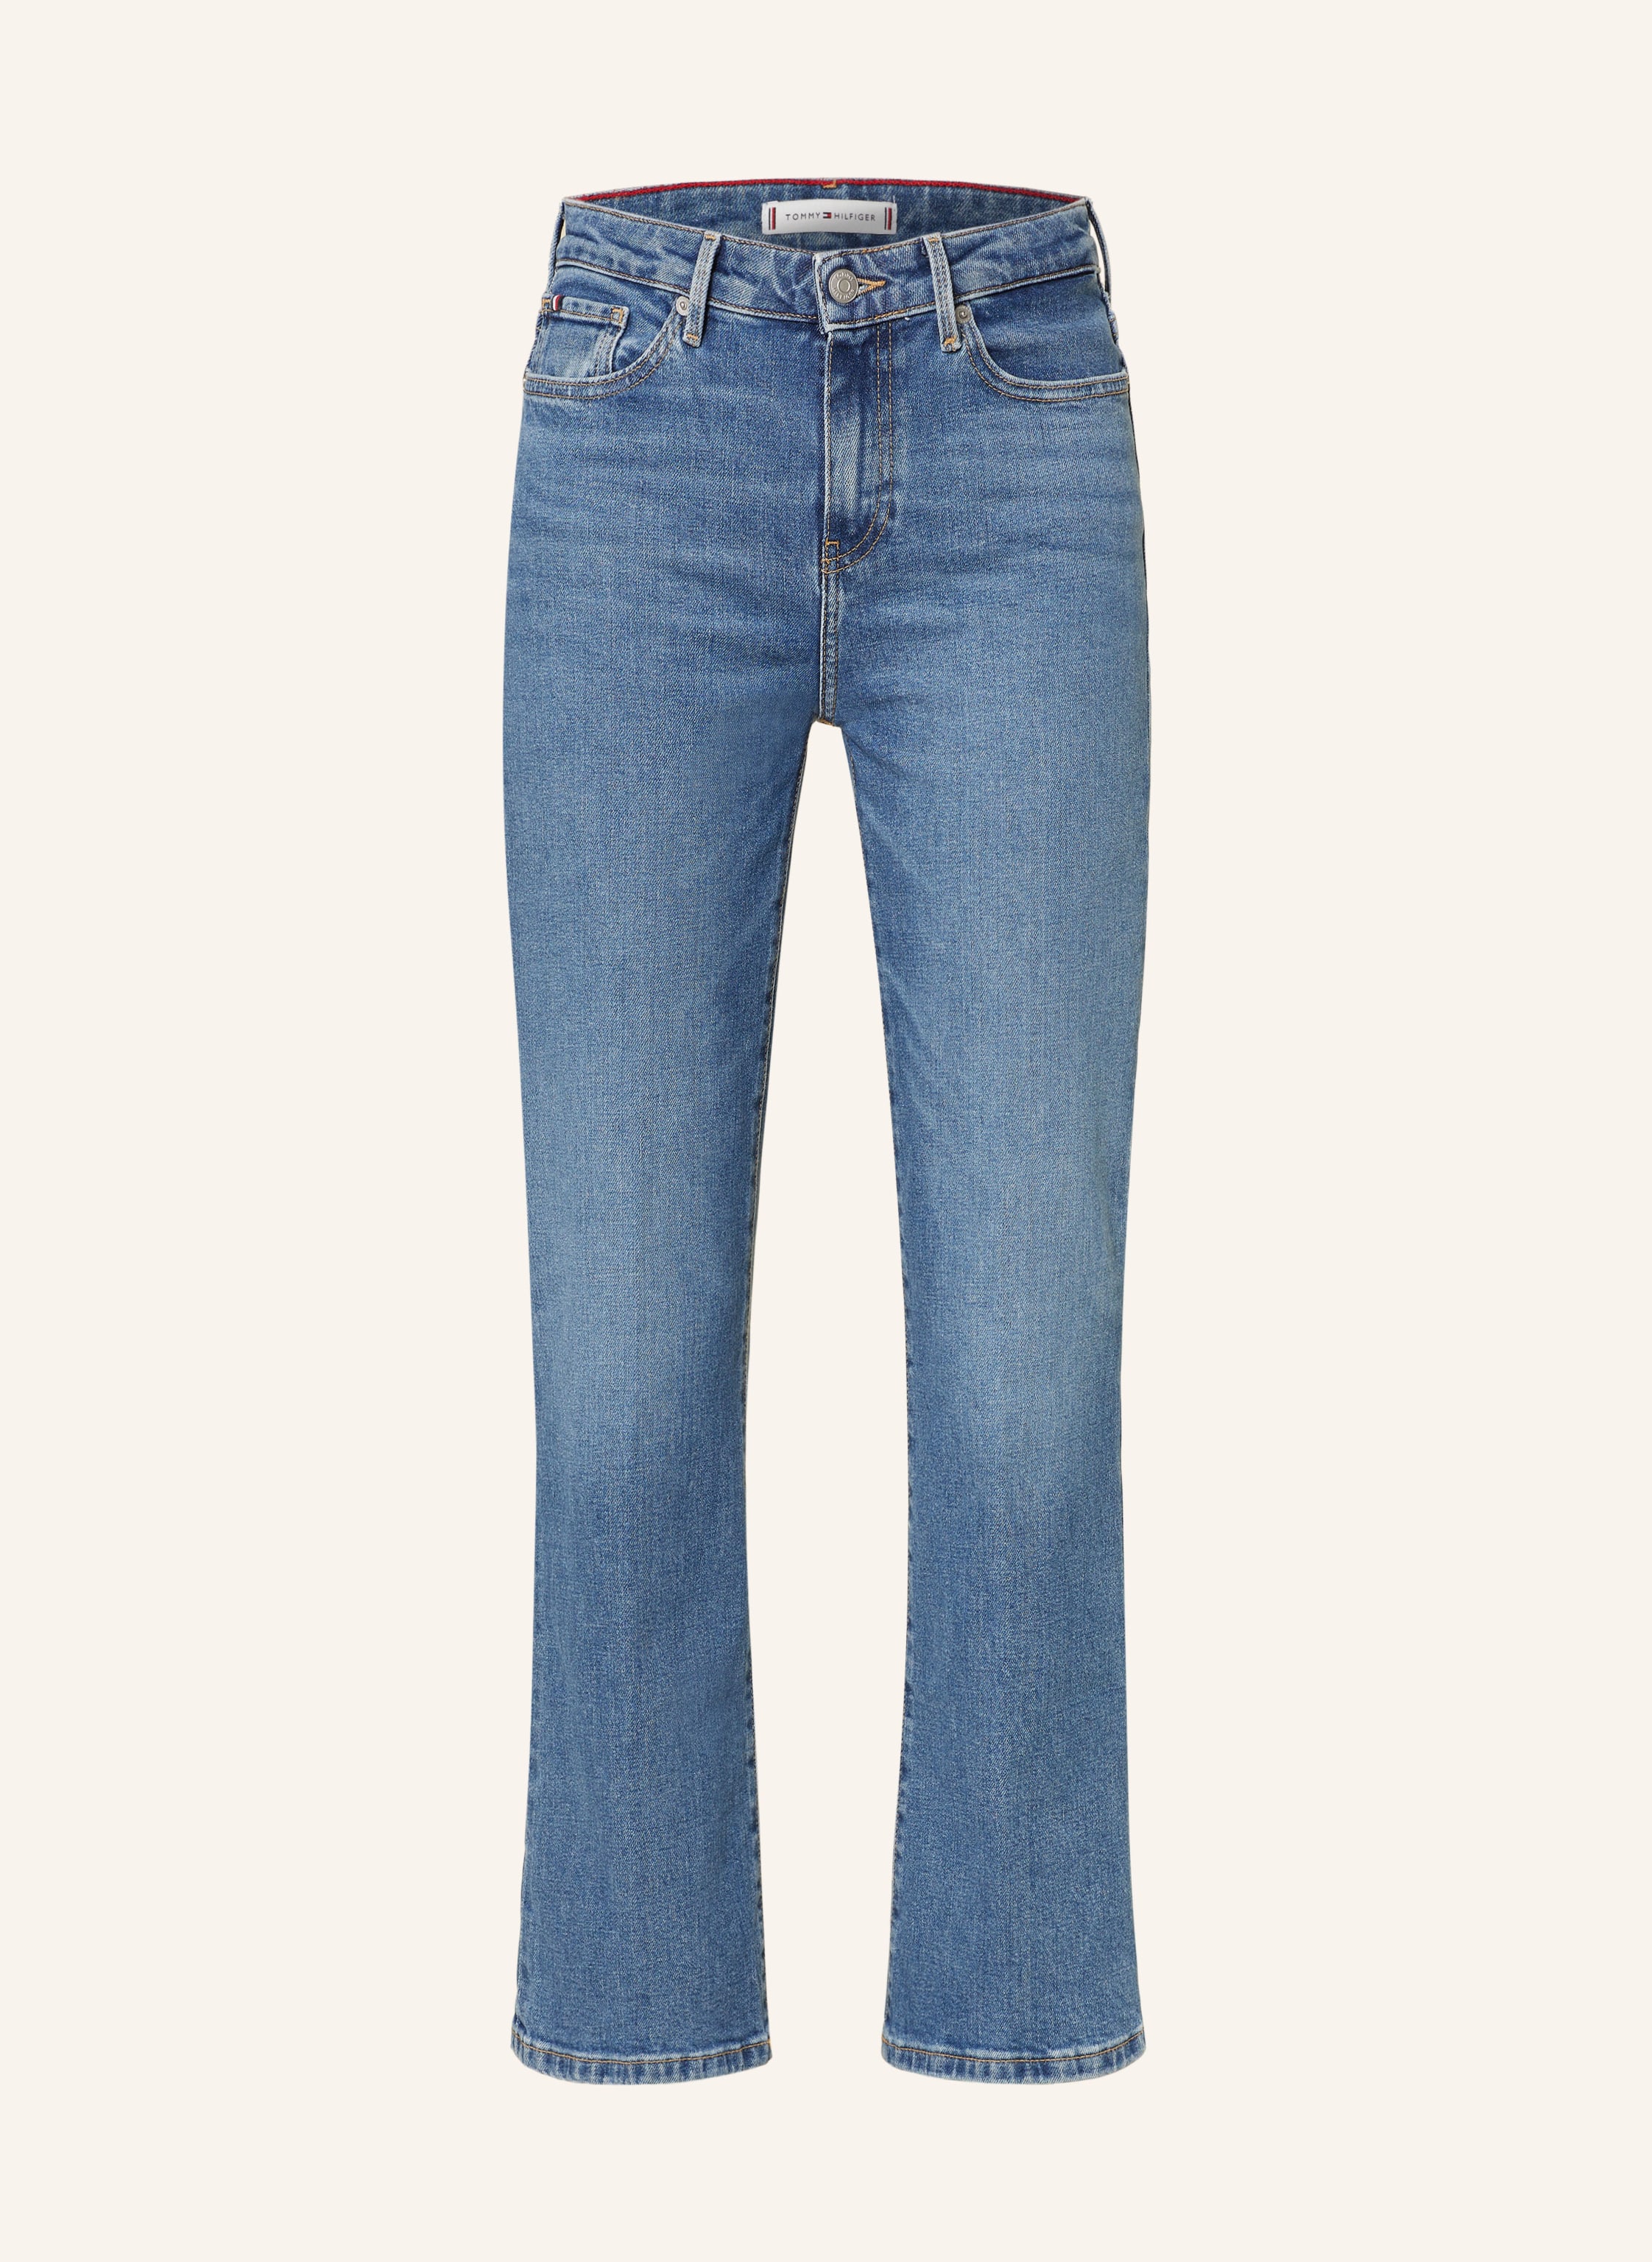 TOMMY HILFIGER Bootcut Jeans in 1a8 mel